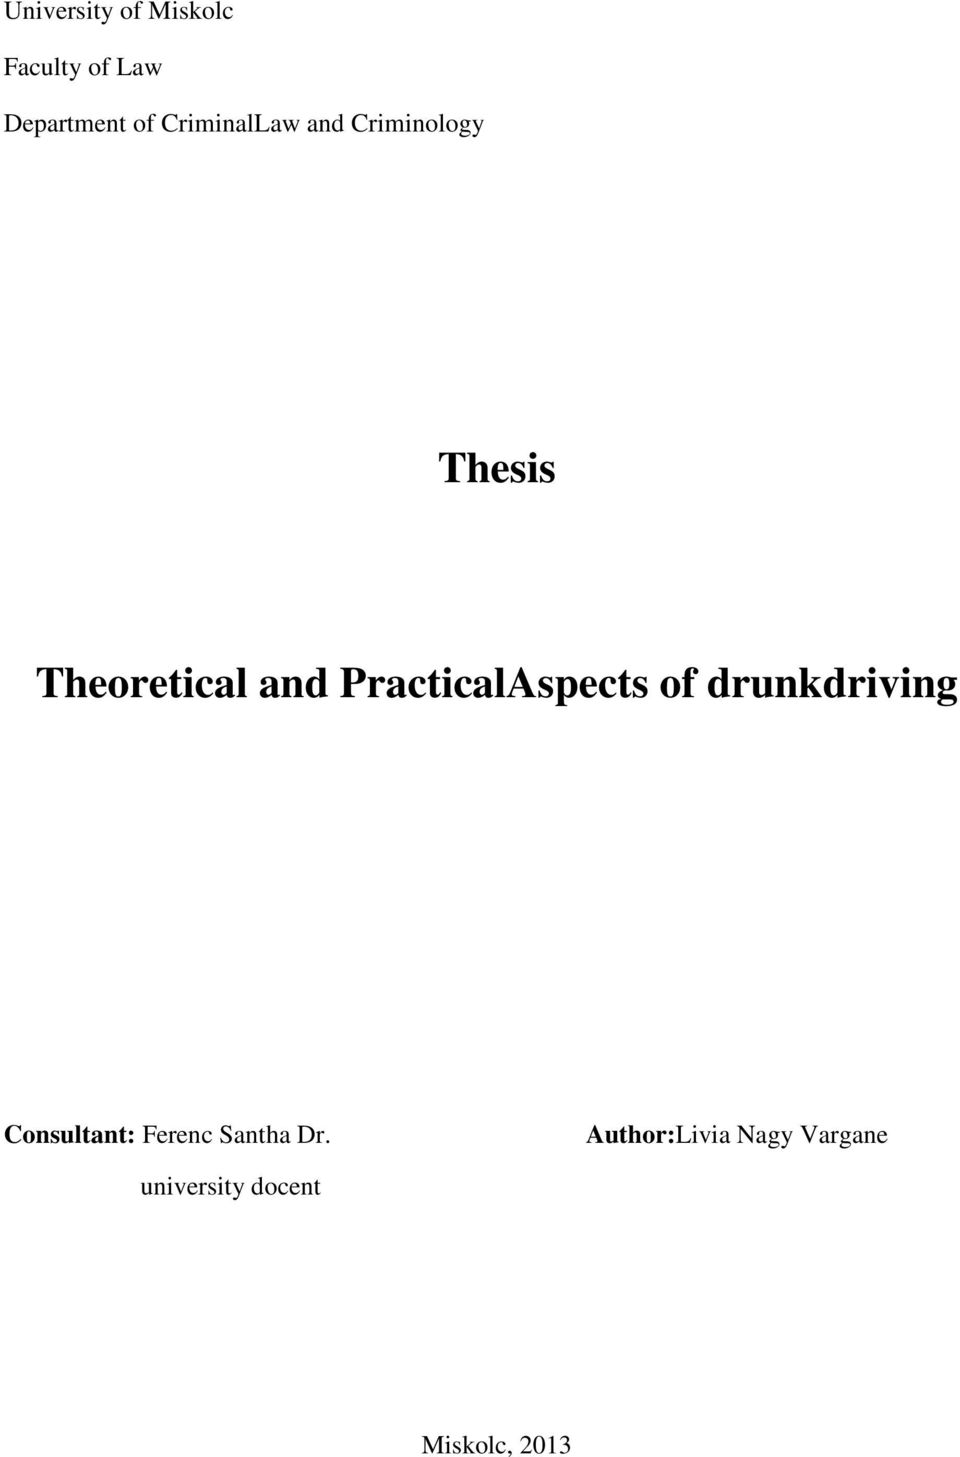 PracticalAspects of drunkdriving Consultant: Ferenc